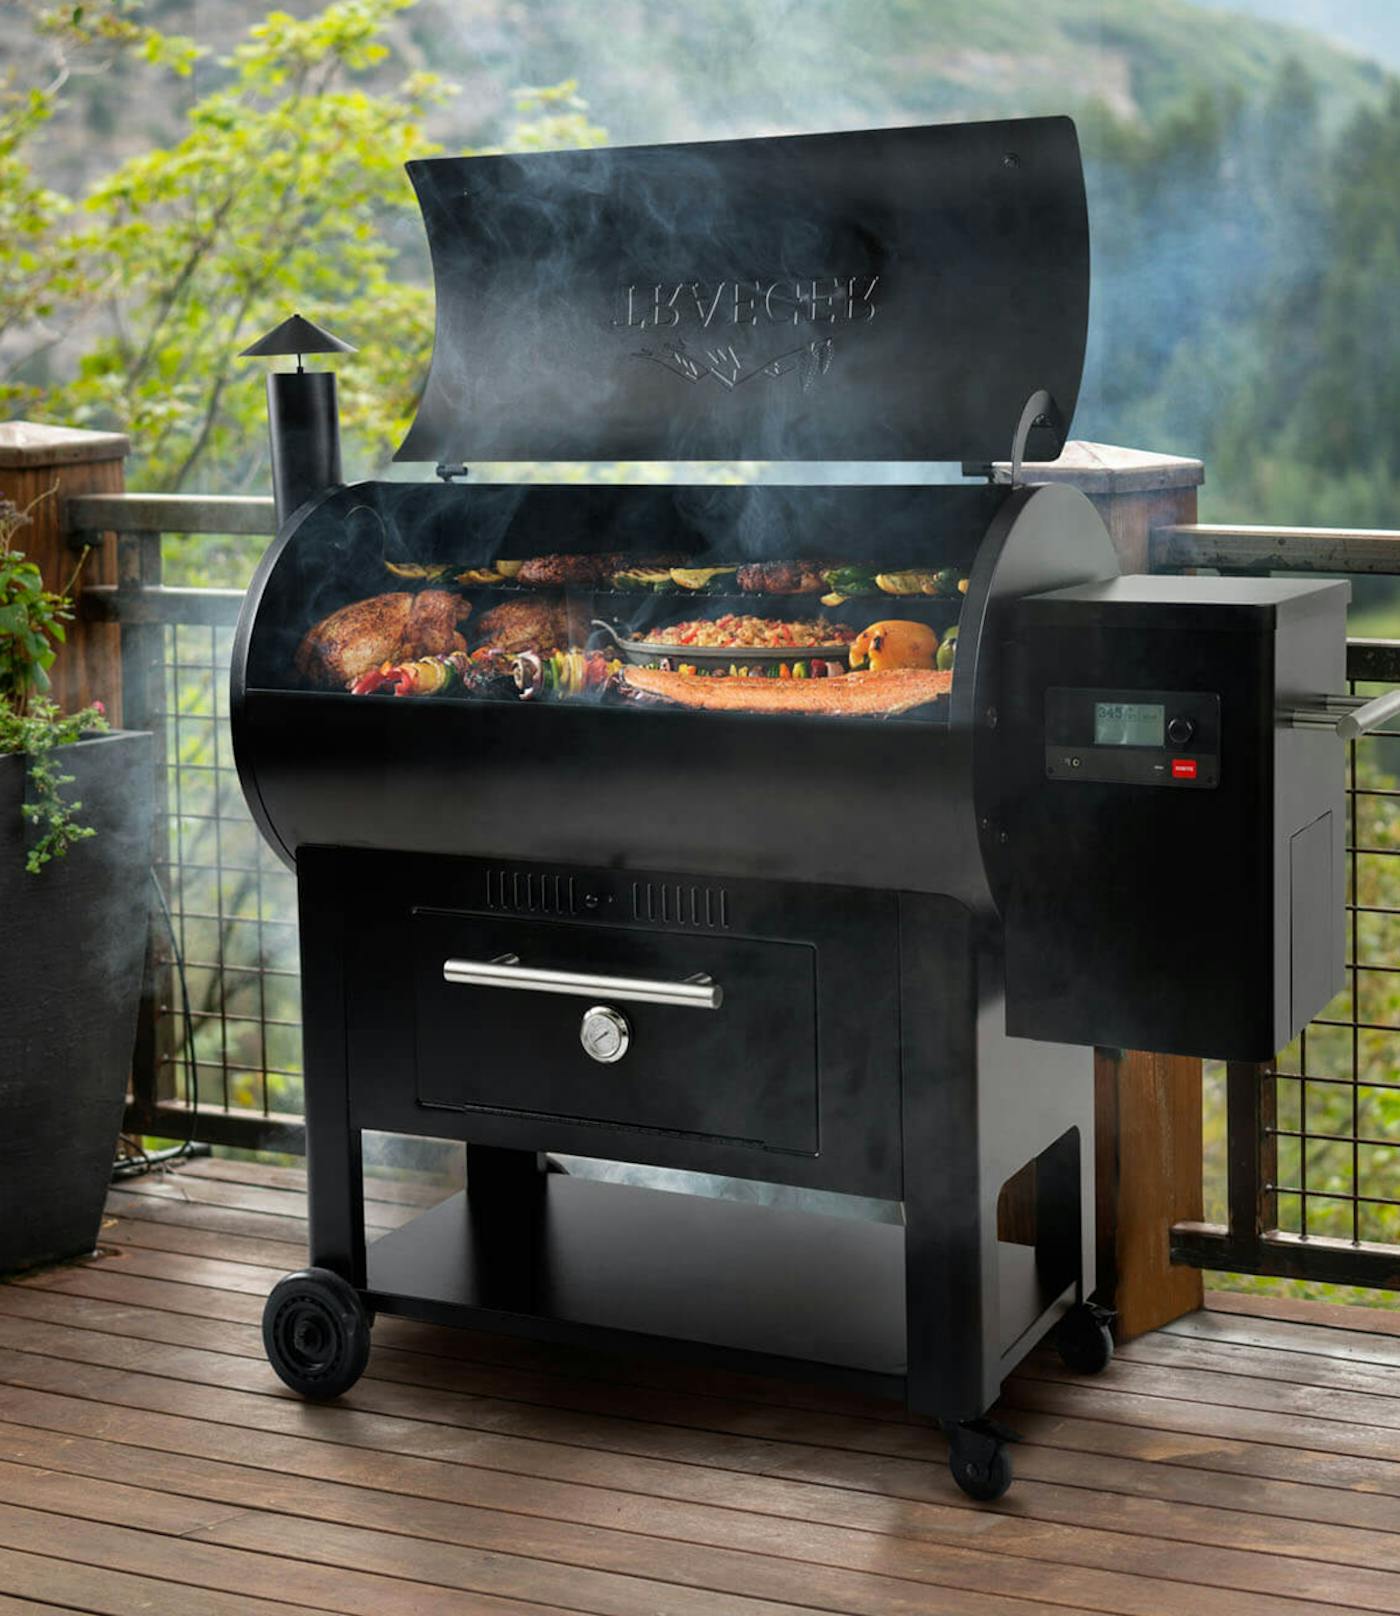 Traeger grill that is open with food cooking and smoke